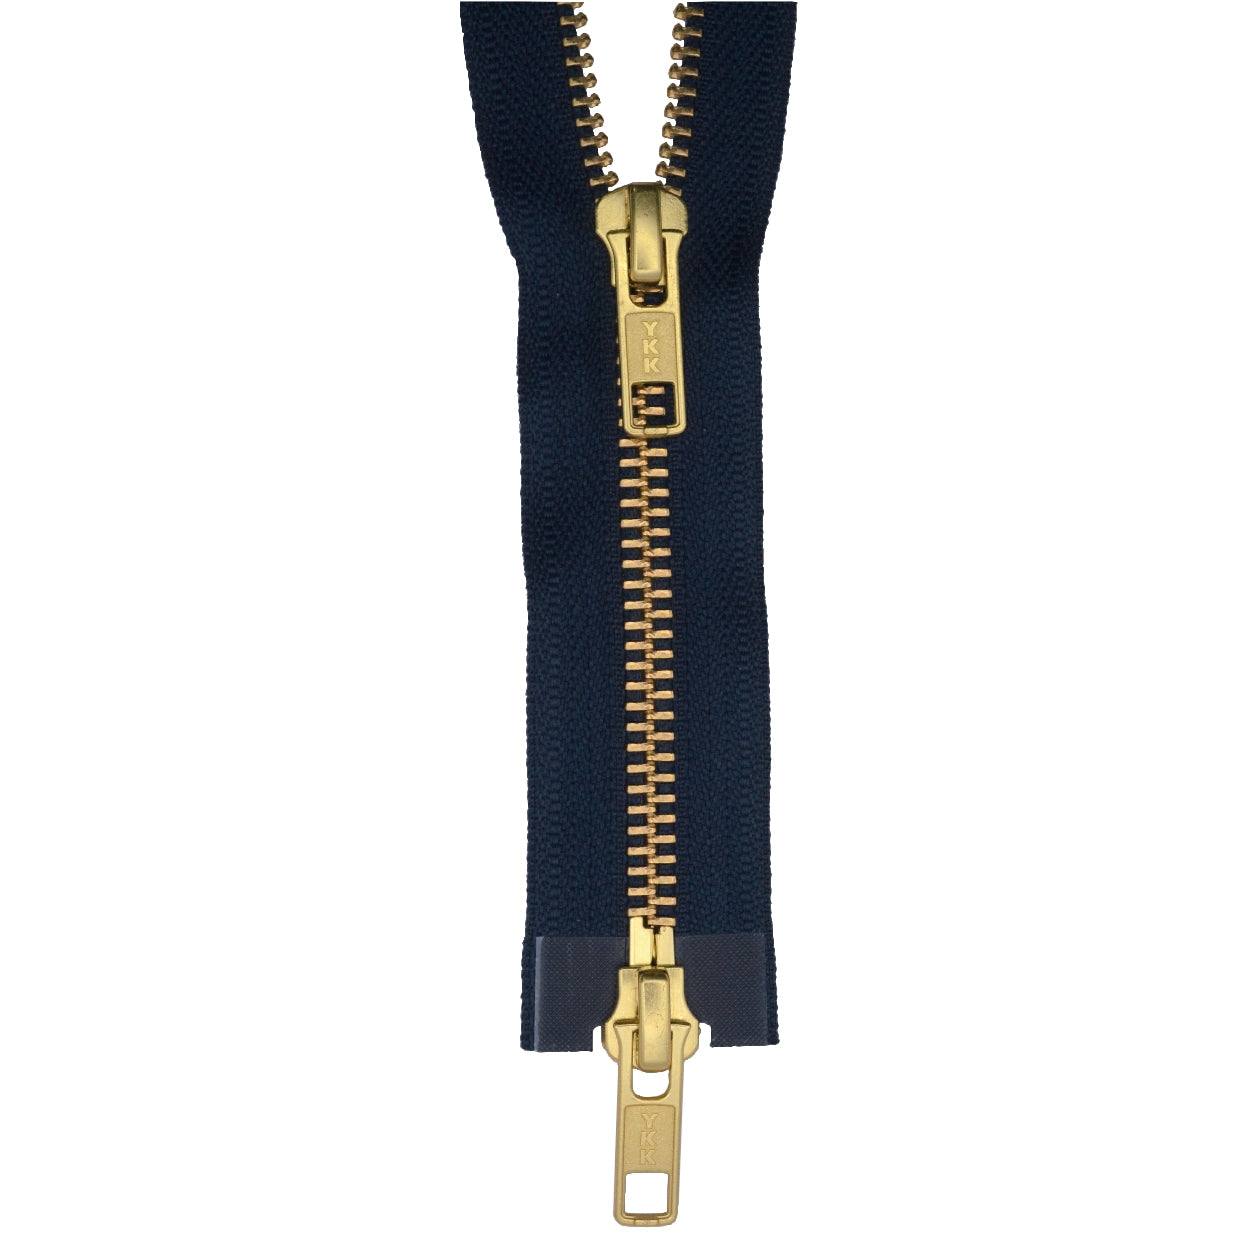 YKK Gold Tooth Two Way Open End Zip, NAVY from Jaycotts Sewing Supplies